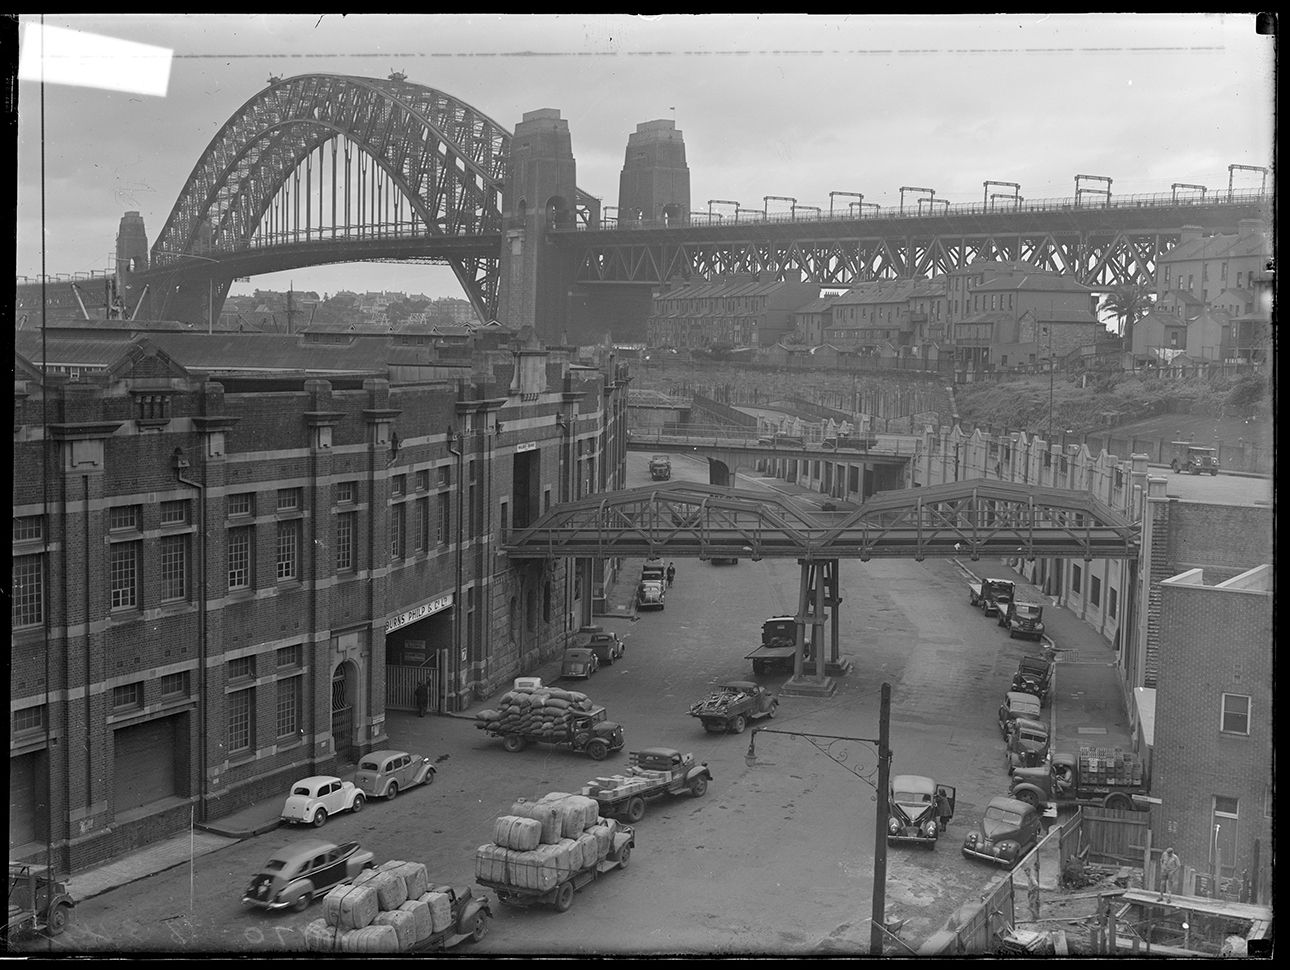 1949 Commercial scene with Sydney Harbour Bridge in the background